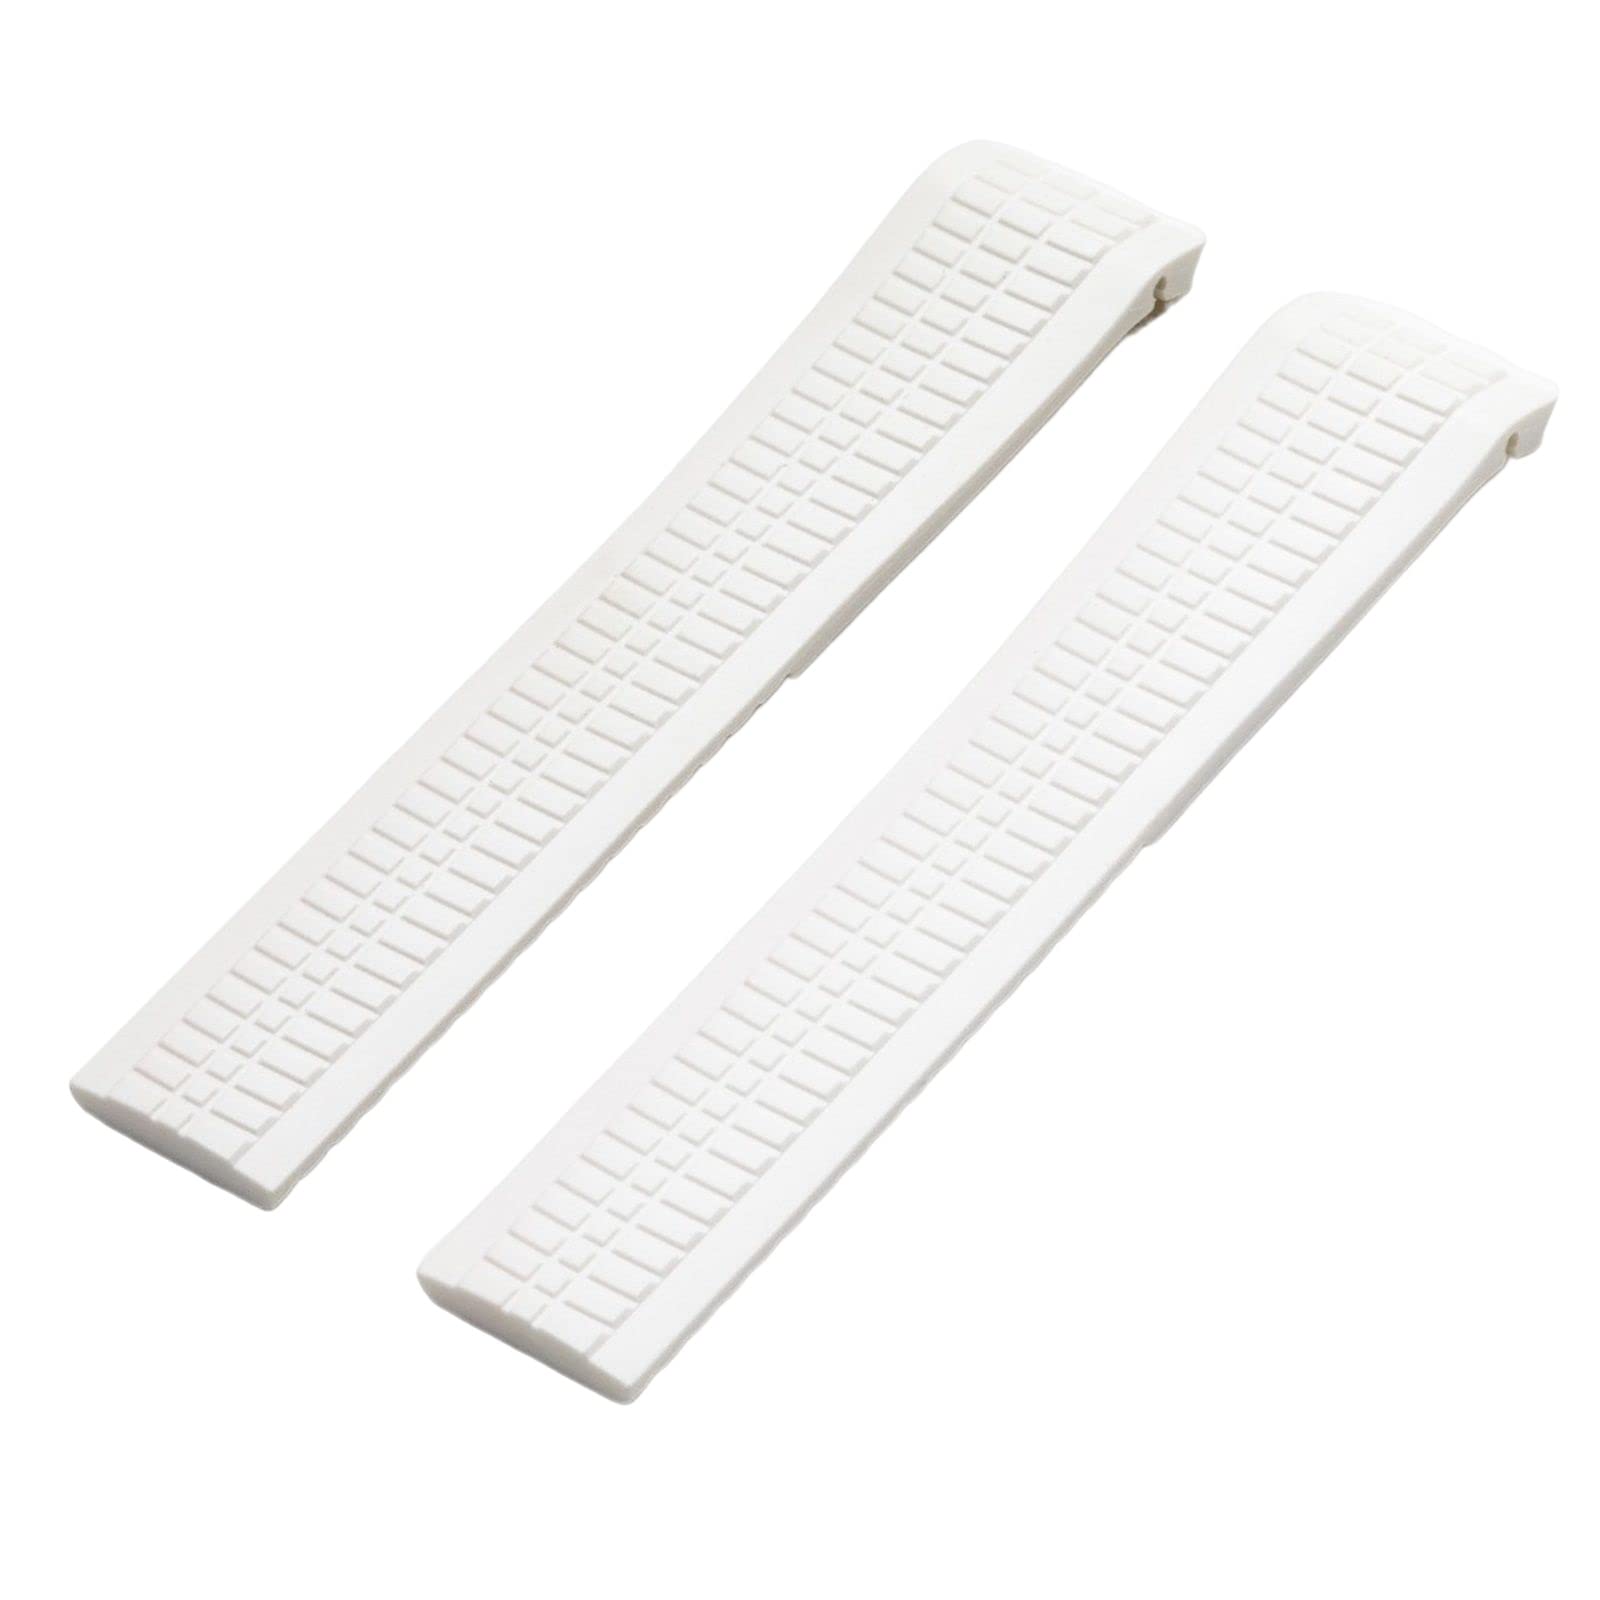 AEMALL for Patek Philippe Aquanaut 5072R-001 Metal Pins Watch Belt 21mm Rubber Watchband (Color : White, Size : No Buckle)